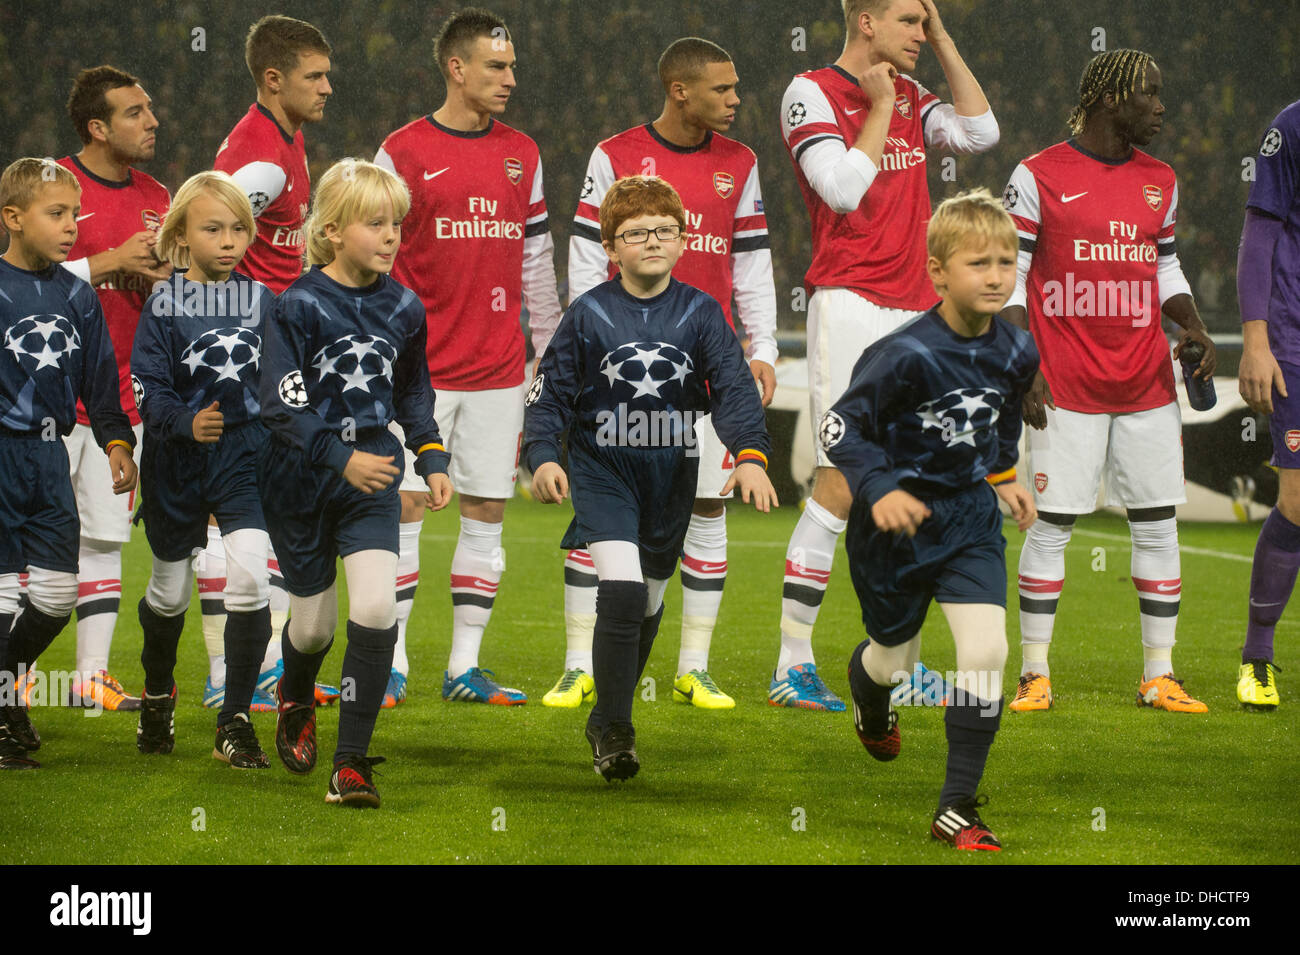 Dortmund, Germany. 06th Nov, 2013. Arsenal's players and escort kids enter  the pitch before the Champions League Group F match between Borussia  Dortmund and FC Arsenal London at BVB-Stadion in Dortmund, Germany,